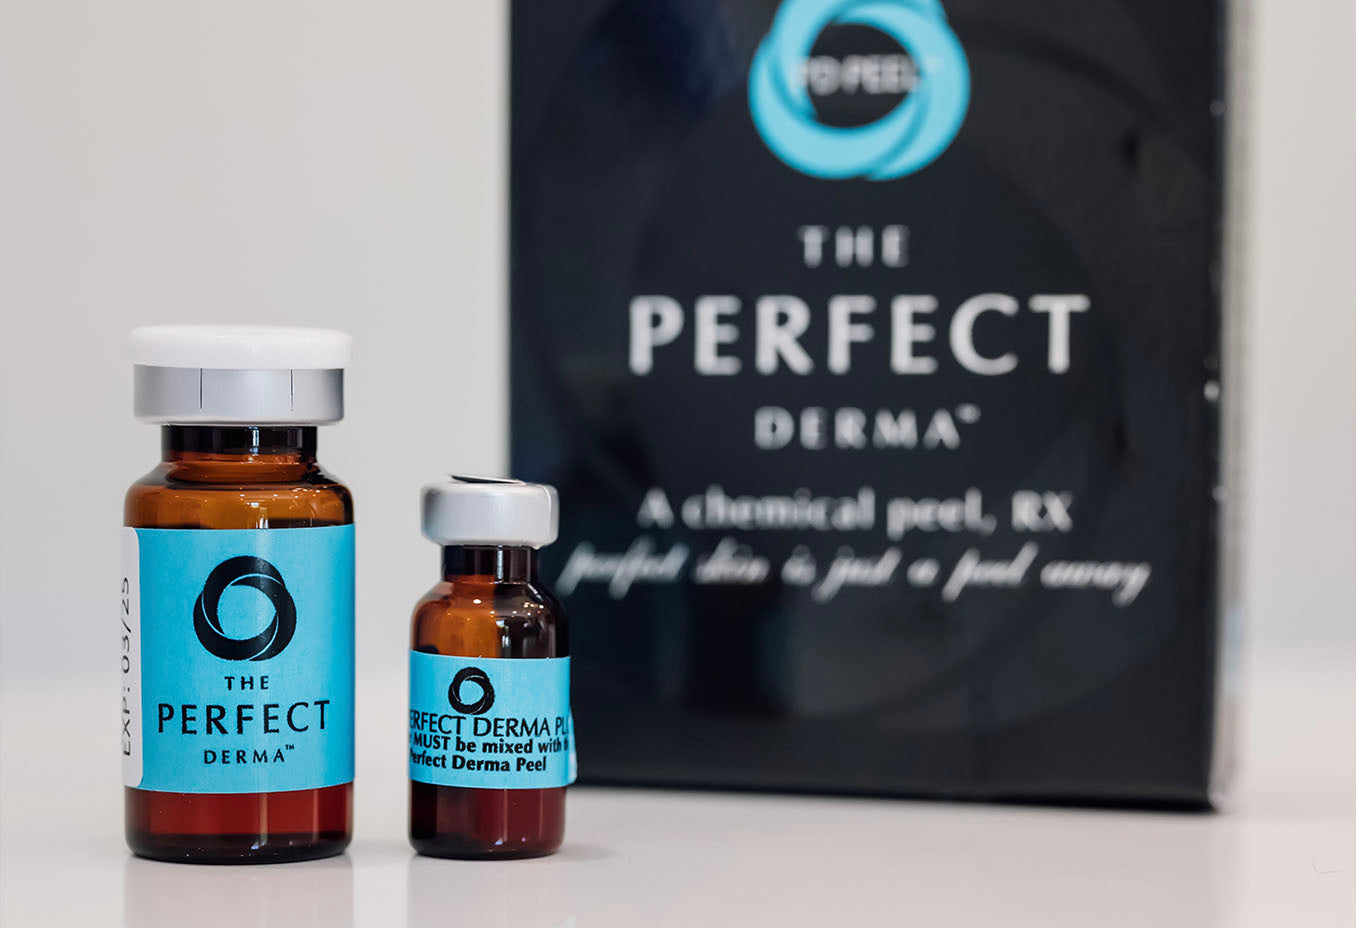 The Perfect Derma Chemical Peel vial and box treatment performed at Skin Design Aesthetics Medical spa in South Shore, MA